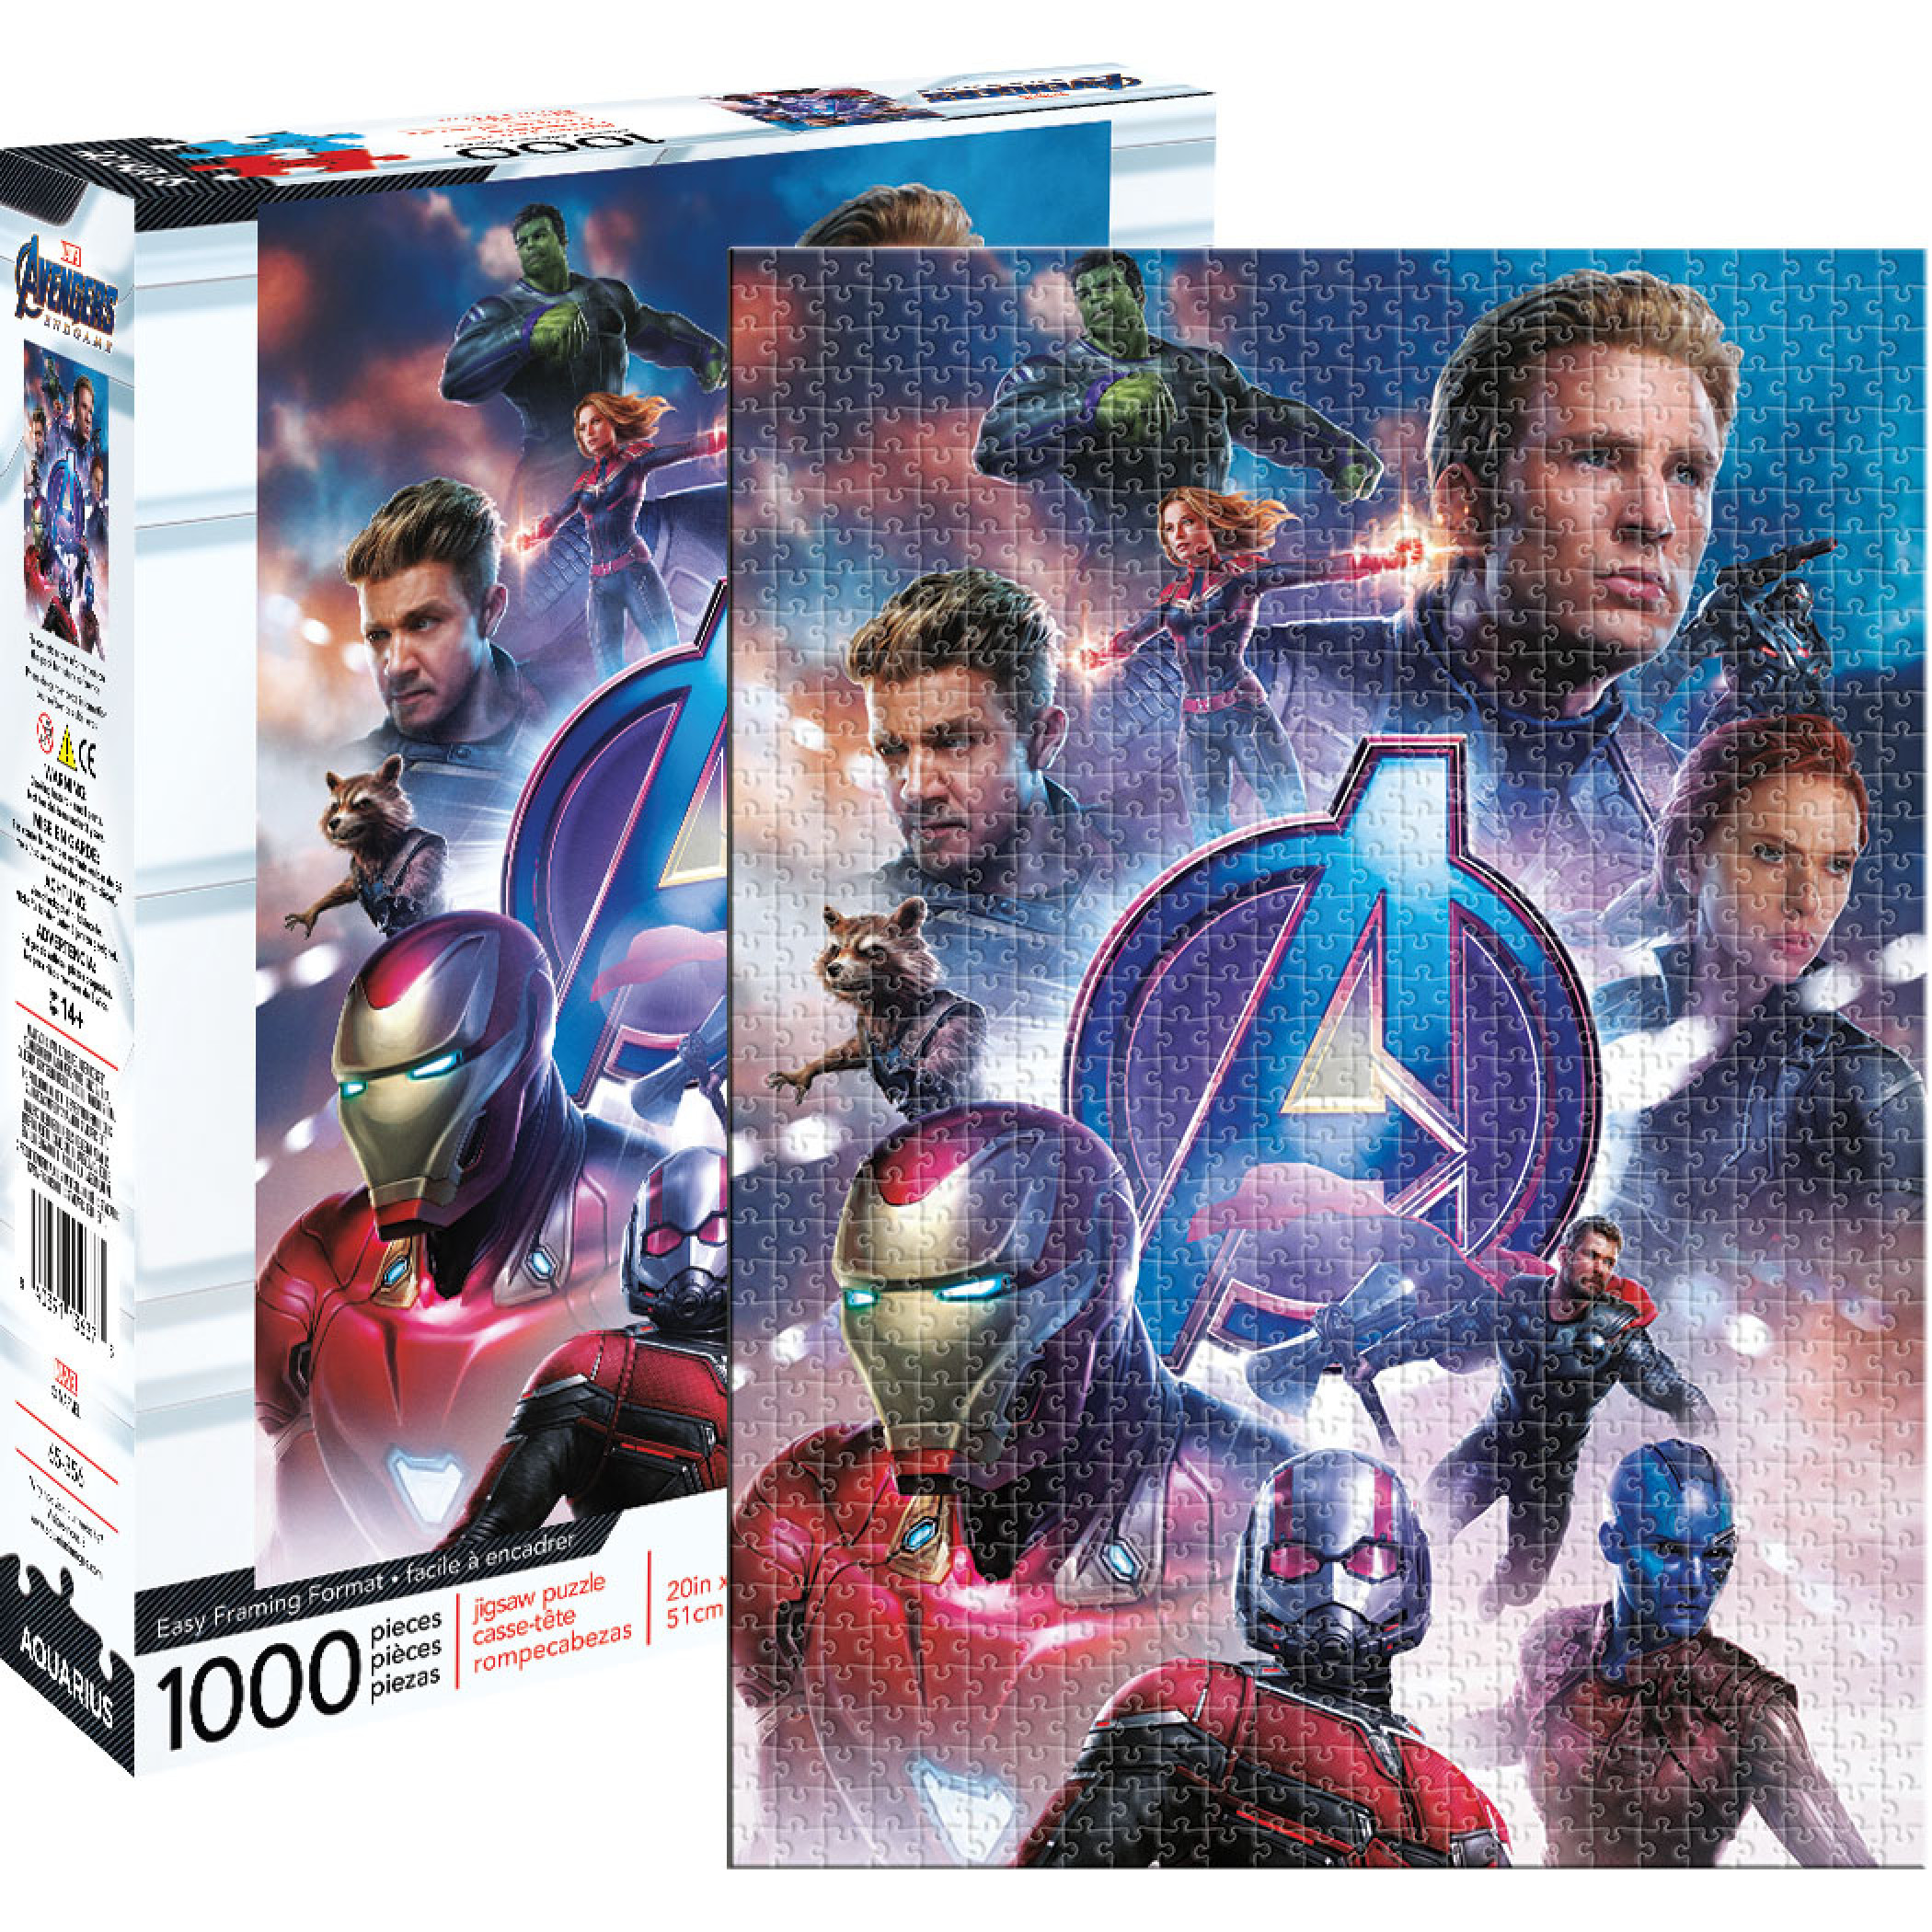 Avengers Endgame Superheroes Jigsaw Puzzle 80 Pieces A5 Home Family Game Gift 